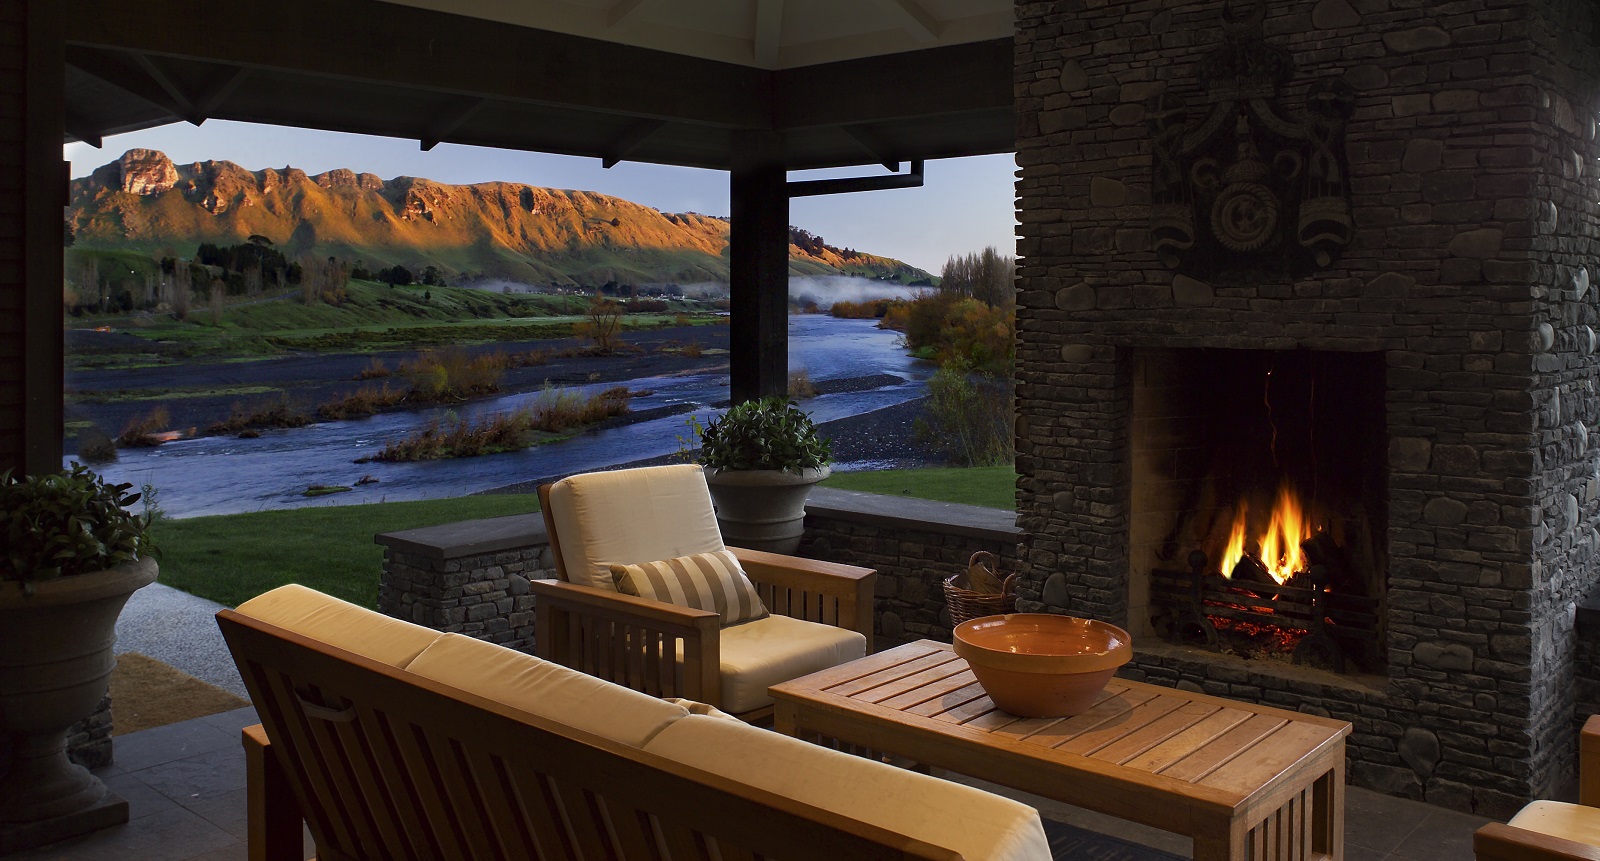 The fire place and interior of accommodation at Black Barn, Hawke's Bay.